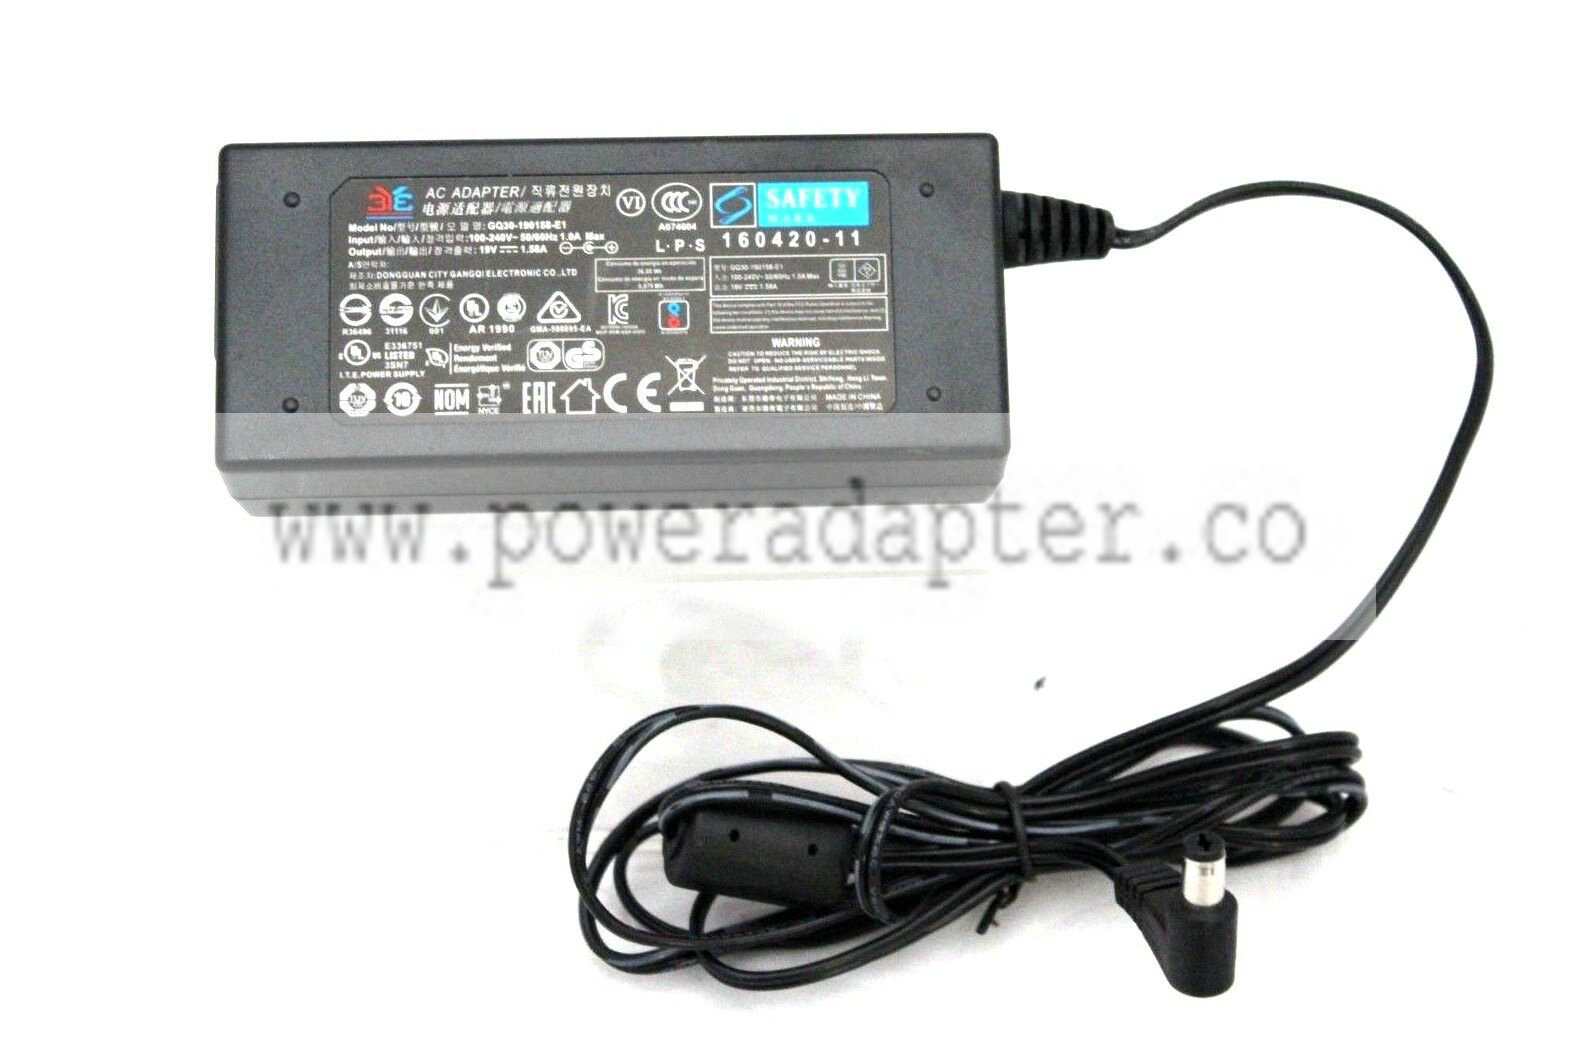 Genuine 3YE AC Adapter Charger GQ30-190158-E1 19V 1.58A Brand: 3YE MPN: Does Not Apply Non-Domestic Product: No Cu